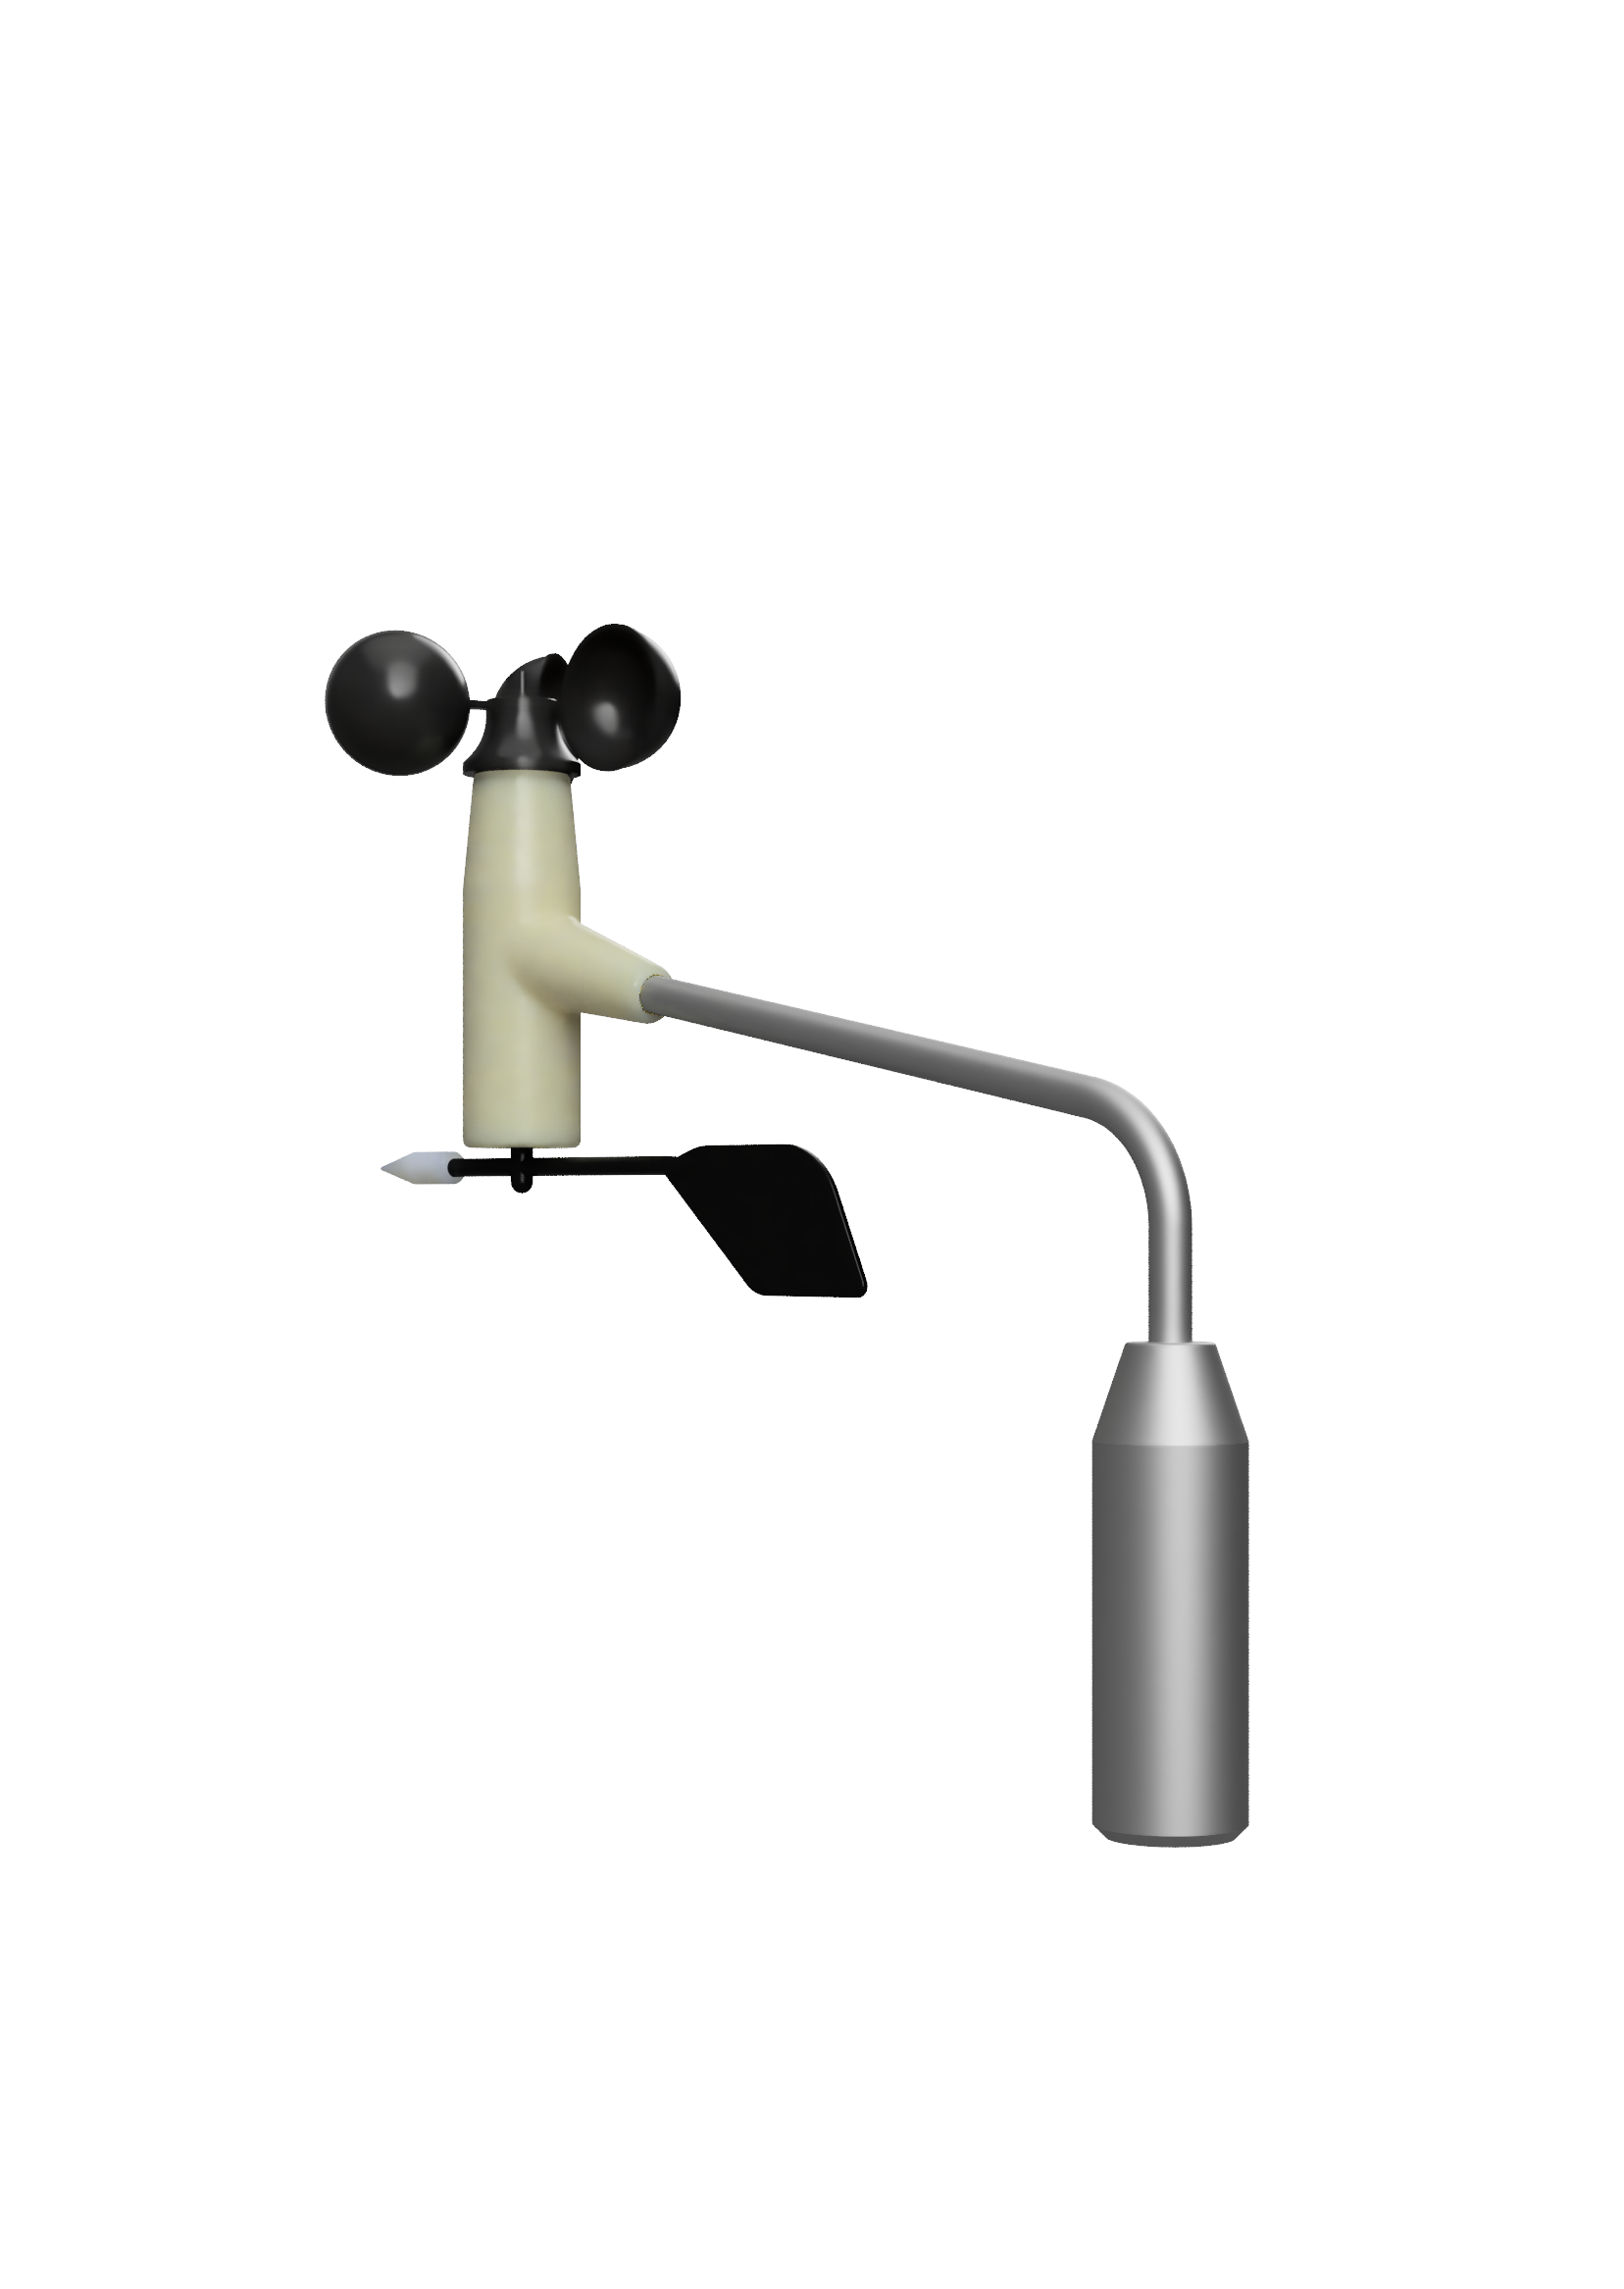 Meteo probe for wind speed and direction Wind speed with alternative output / 33 Hz = 10 m/s Type: f.566.2.22